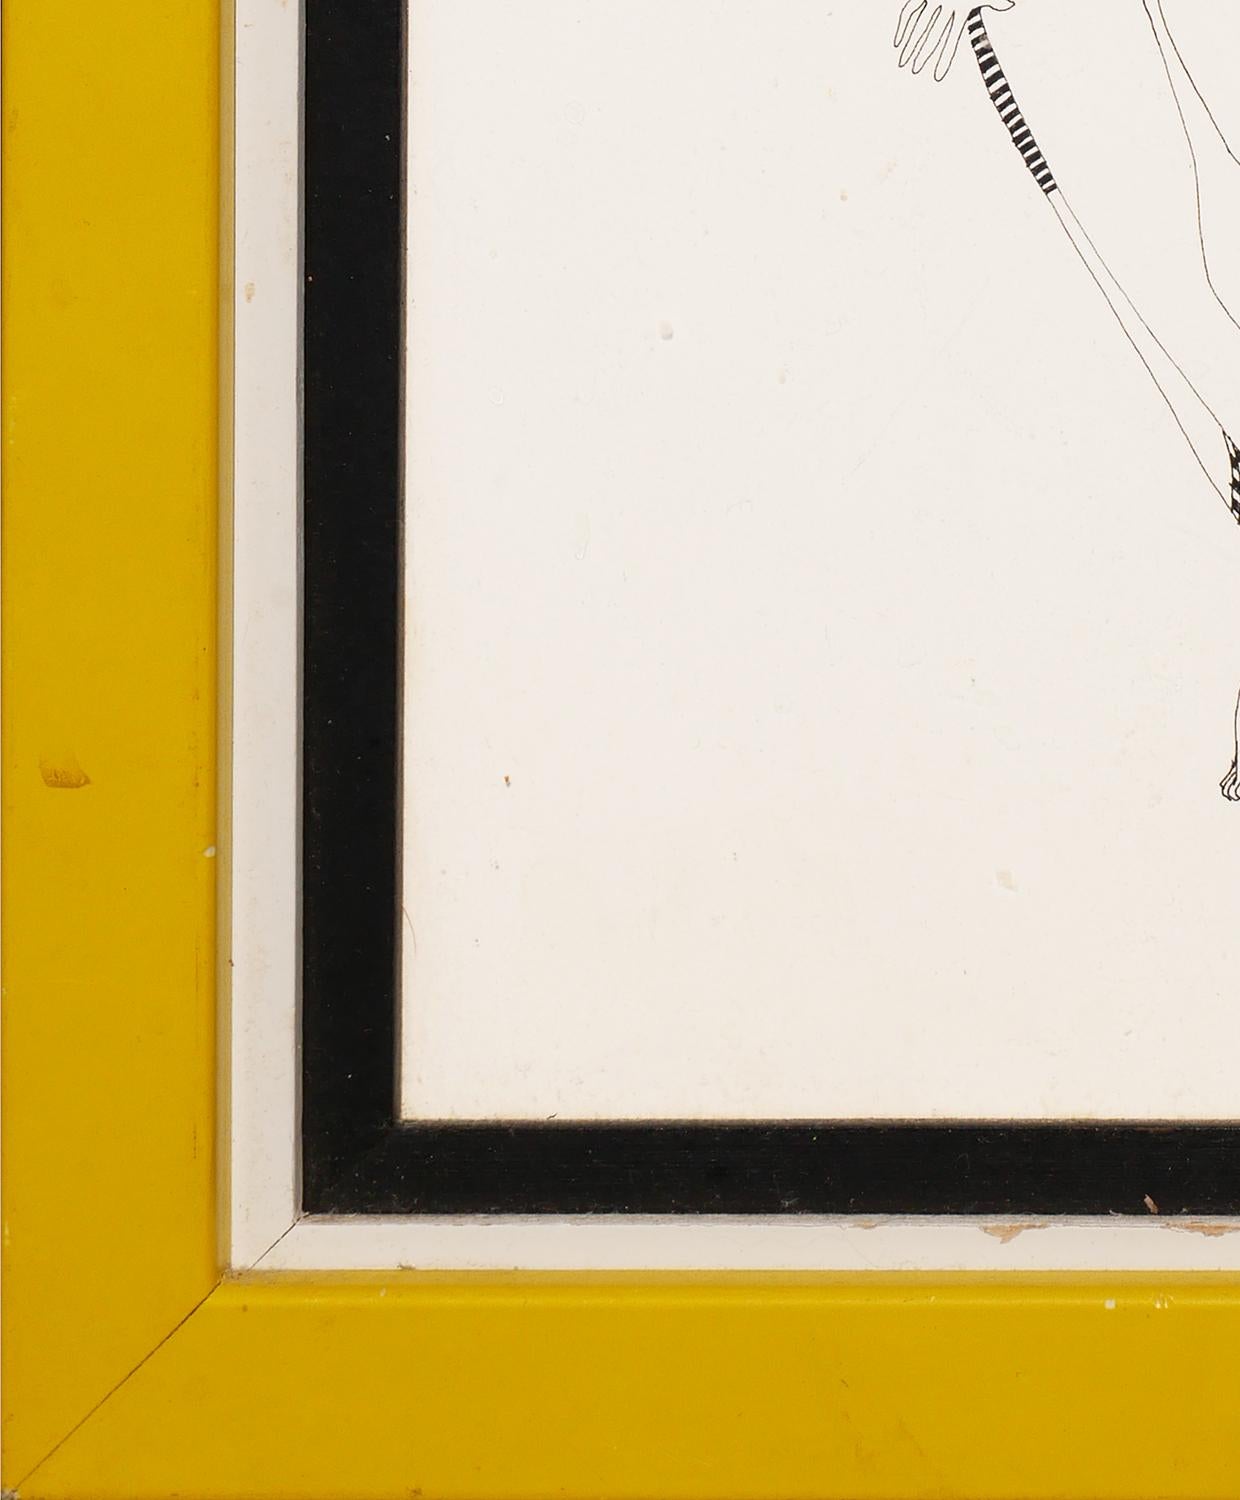 Modern abstract figurative drawing of a nude, tattooed woman with wings by Houston, TX artist Charles Pebworth. Signed by the artist on the figure's left hip. Hung behind glass in a yellow, black, and white frame. 

Dimensions Without Frame: H 10